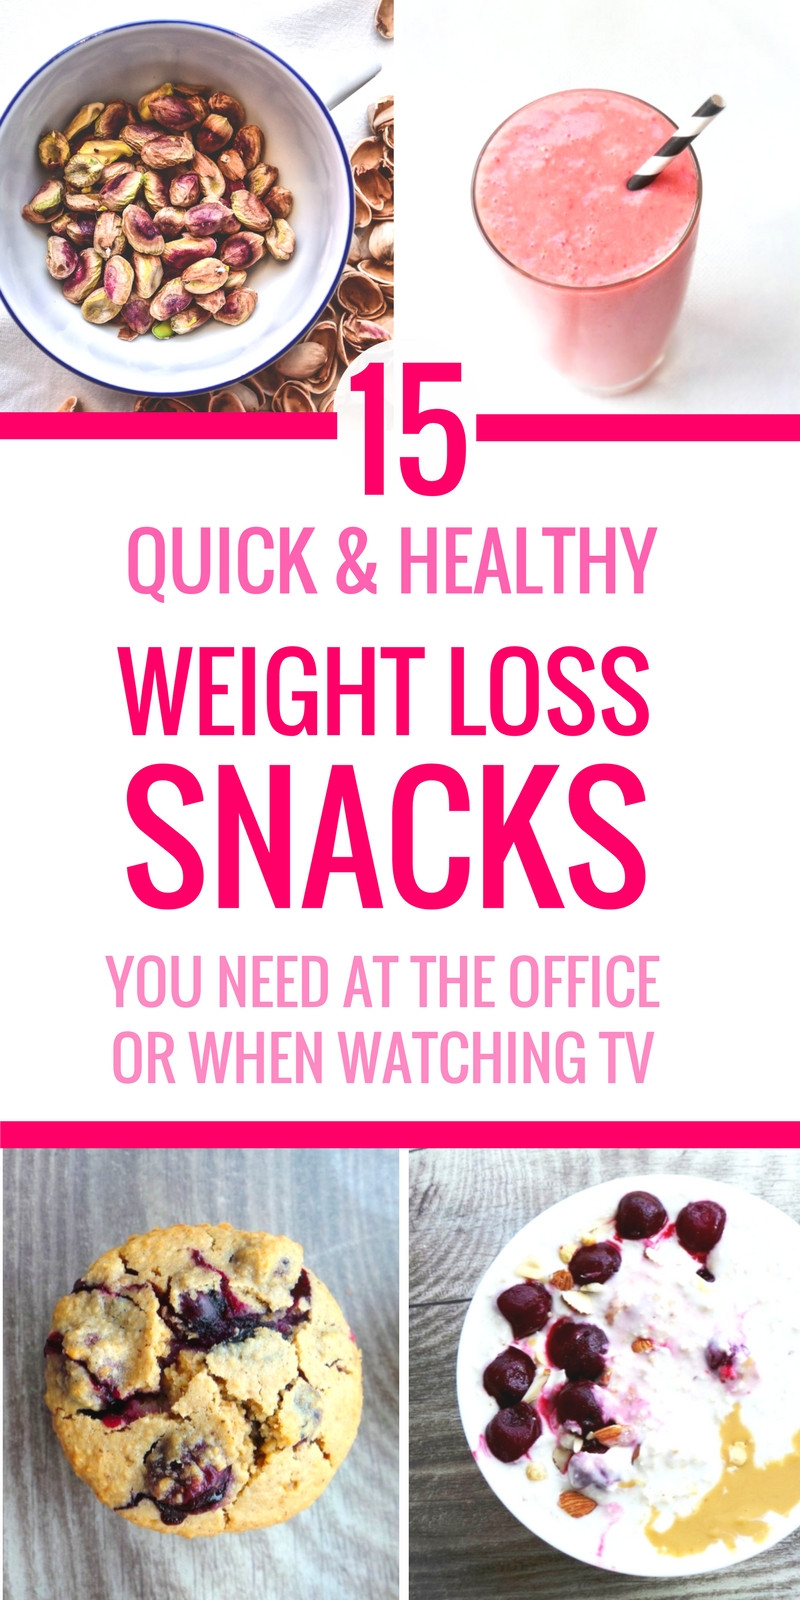 Quick Healthy Snacks On The Go
 Easy Healthy Snacks The Go At Work or Watching TV